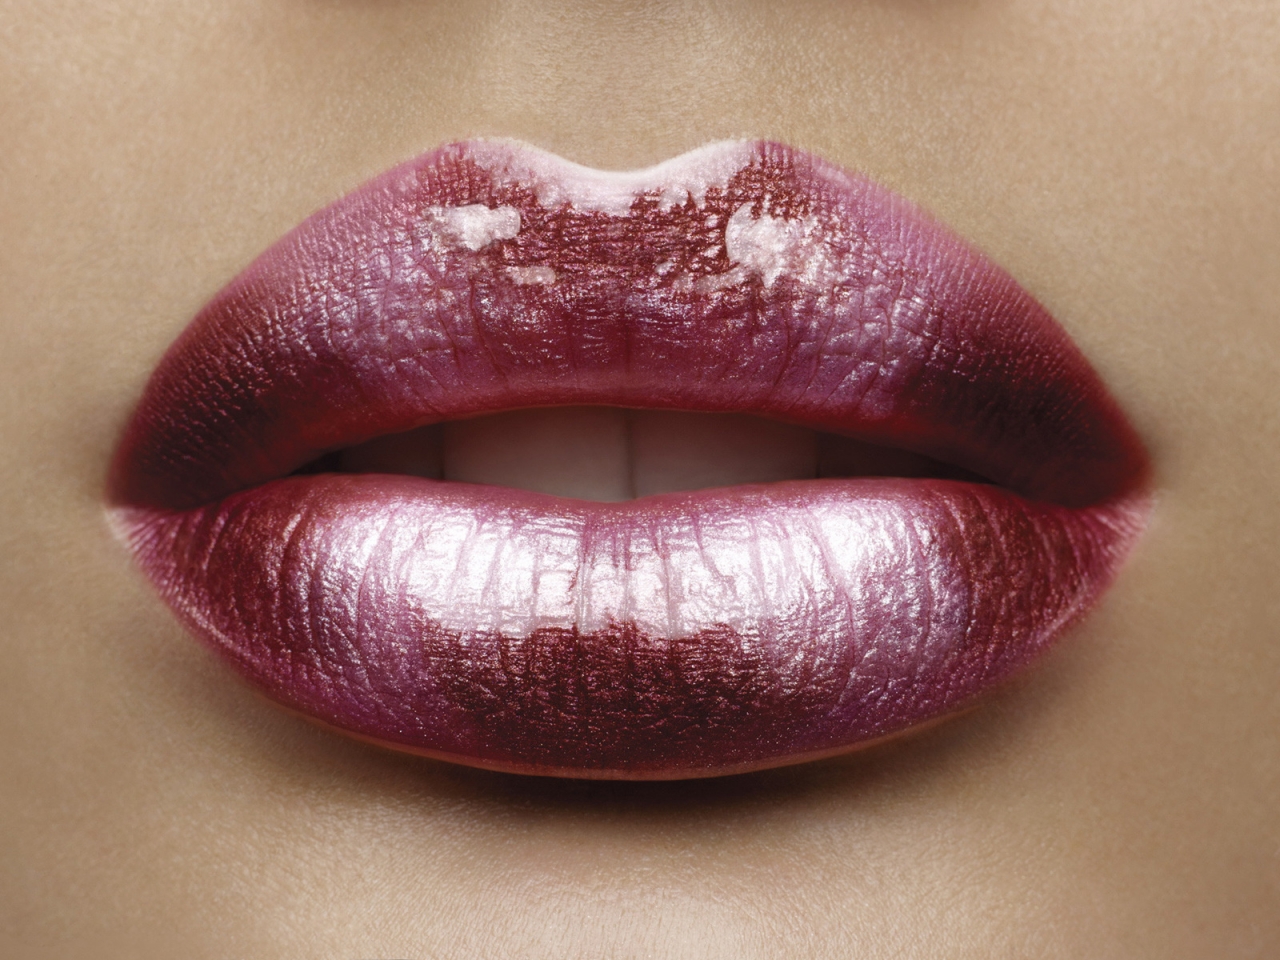 Just my Lips for 1280 x 960 resolution